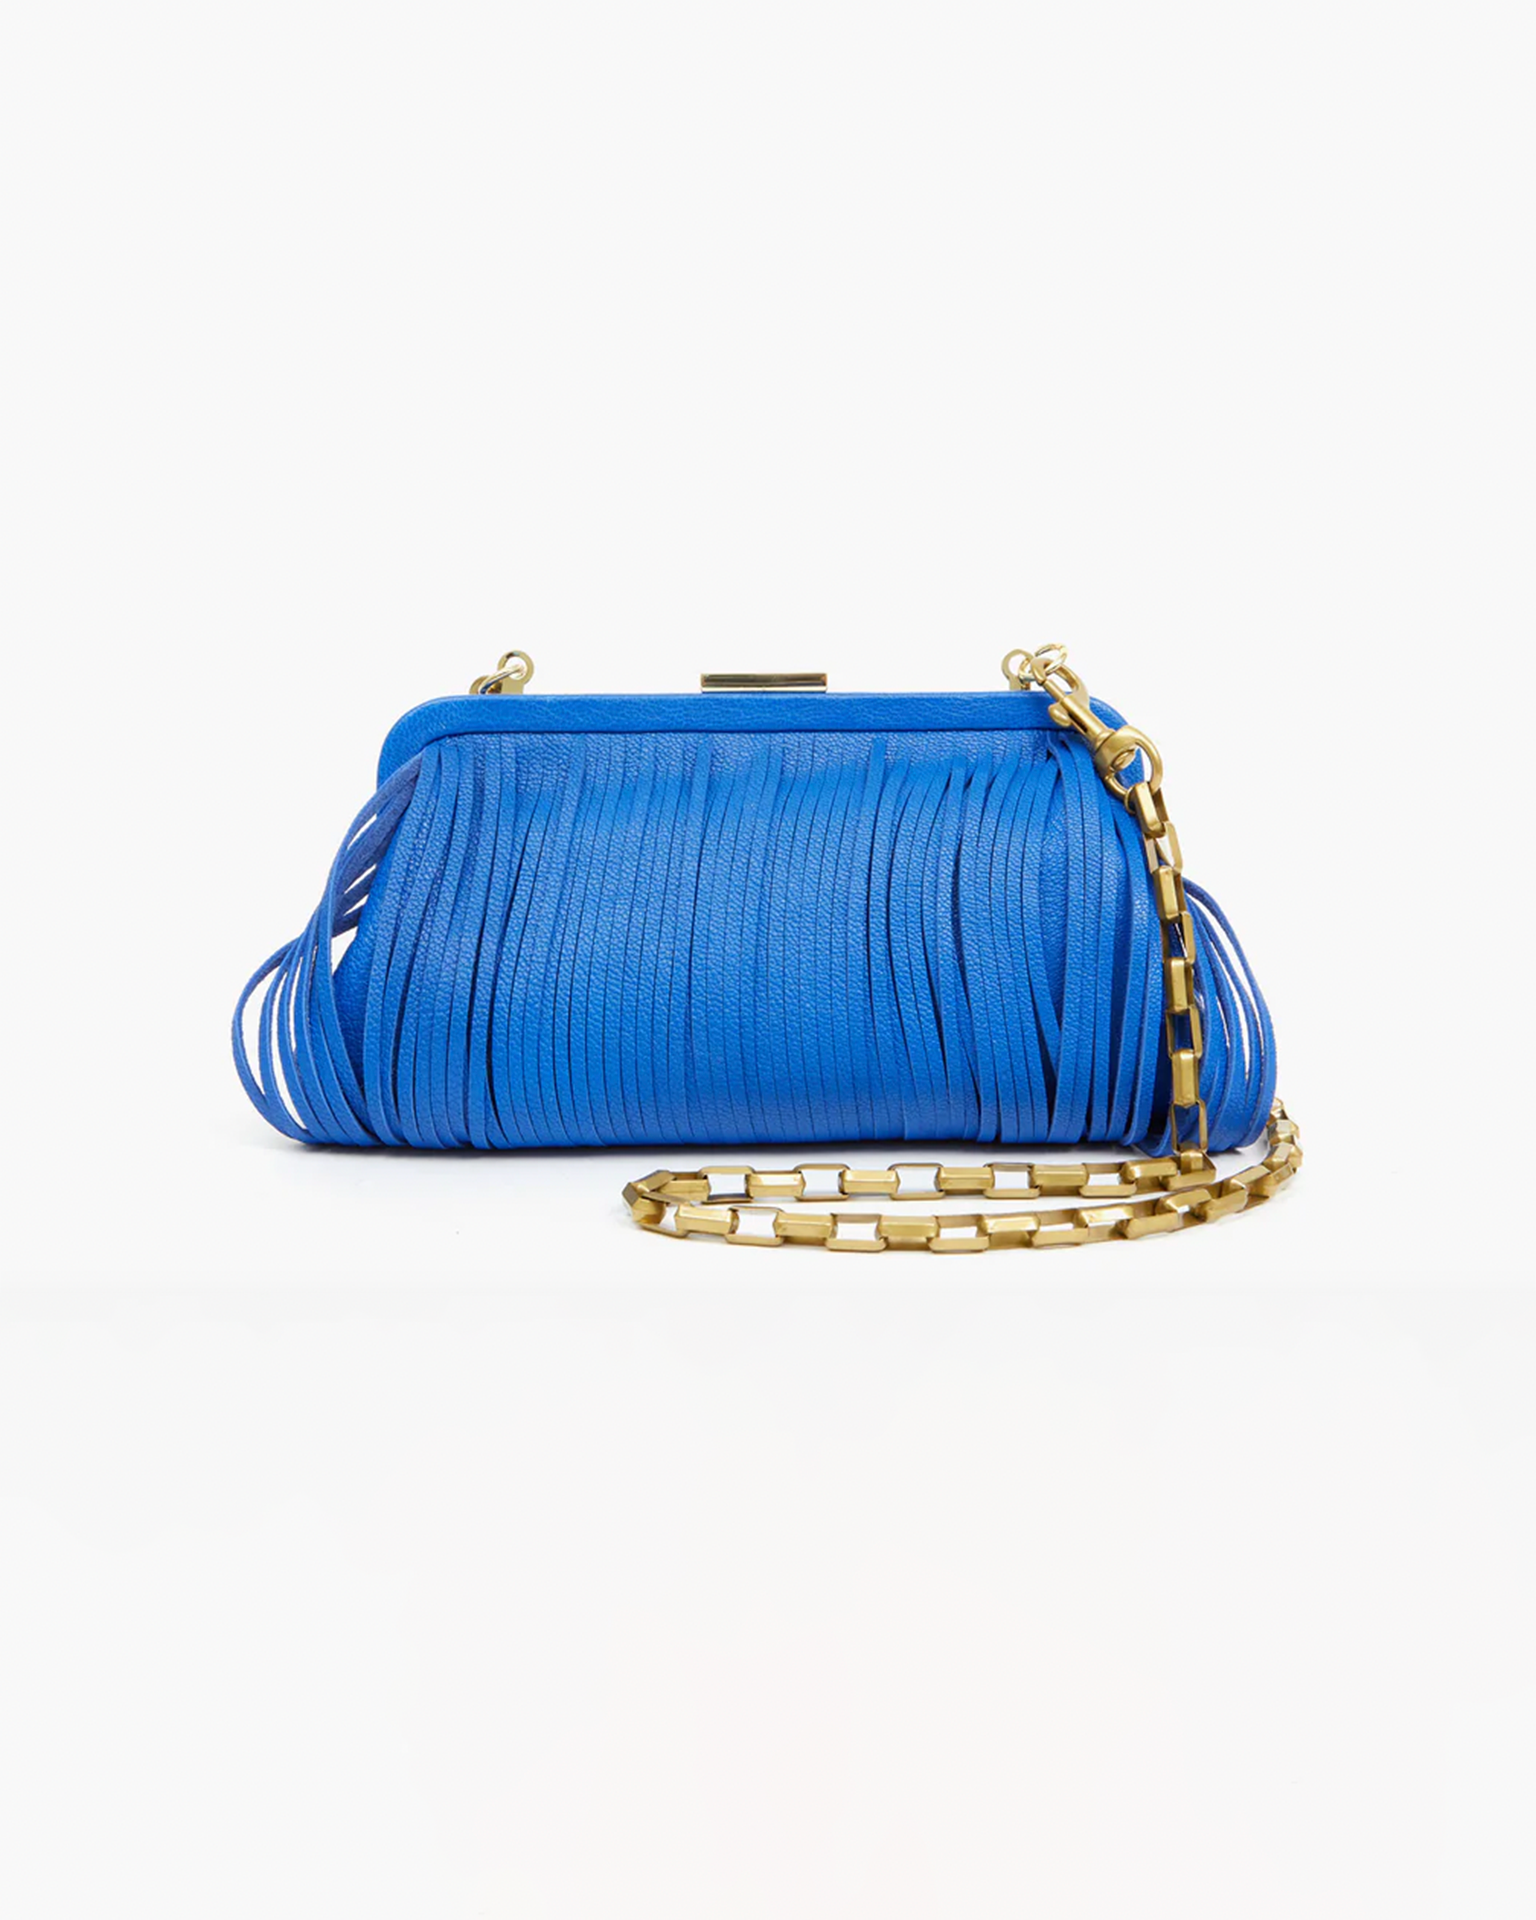 Luxe Bags for Every Occasion